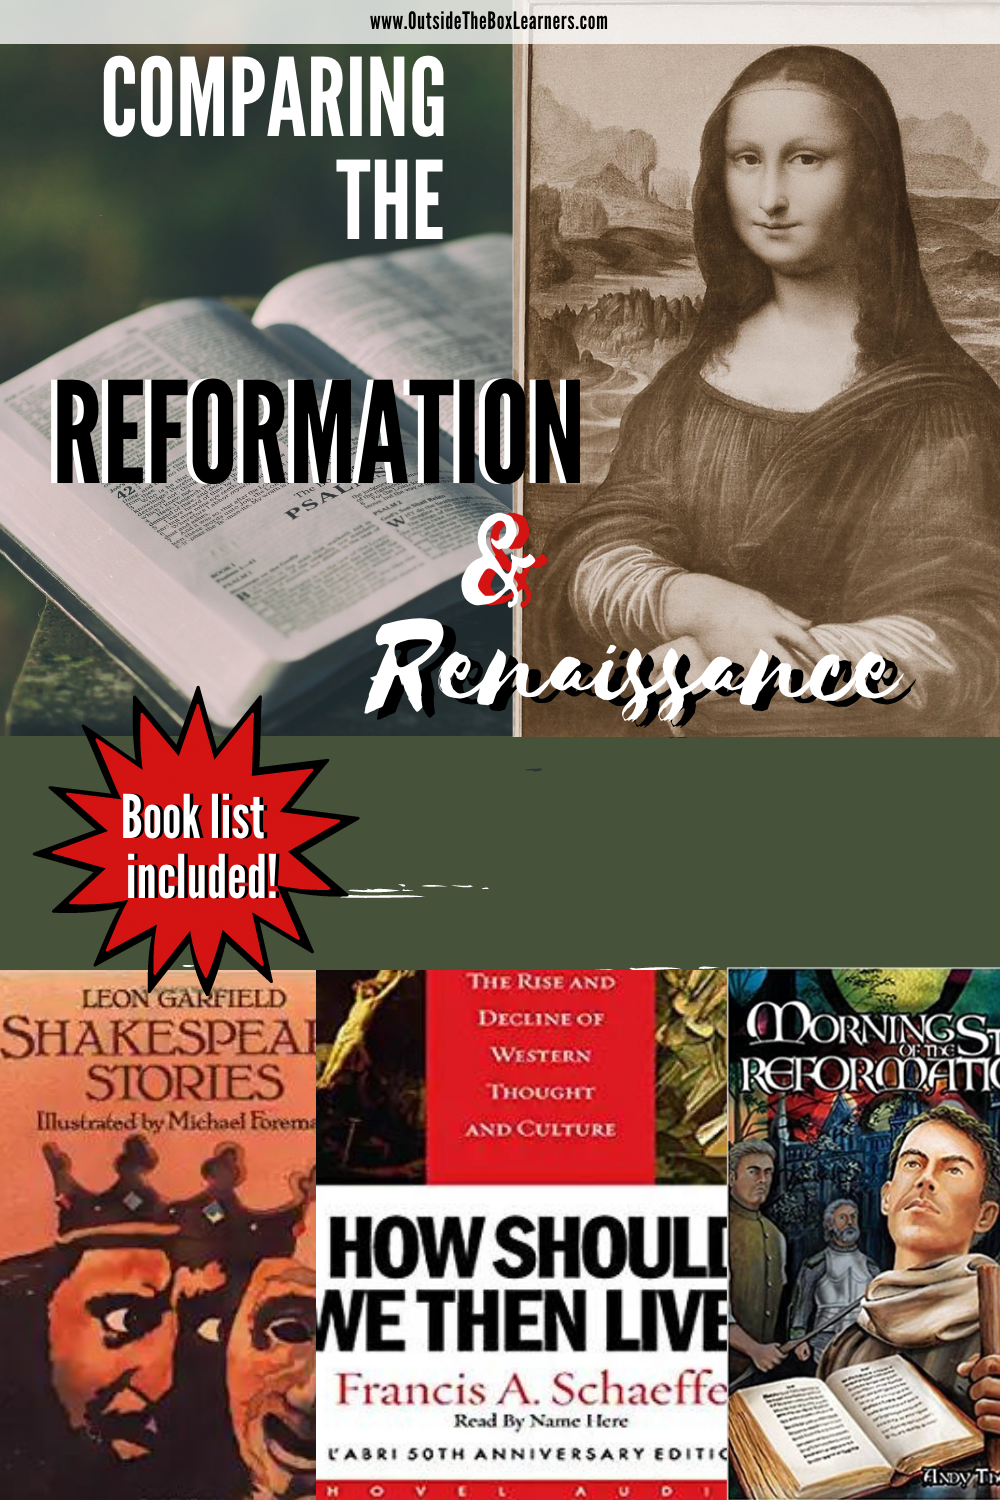 Comparing the Reformation and Renaissance